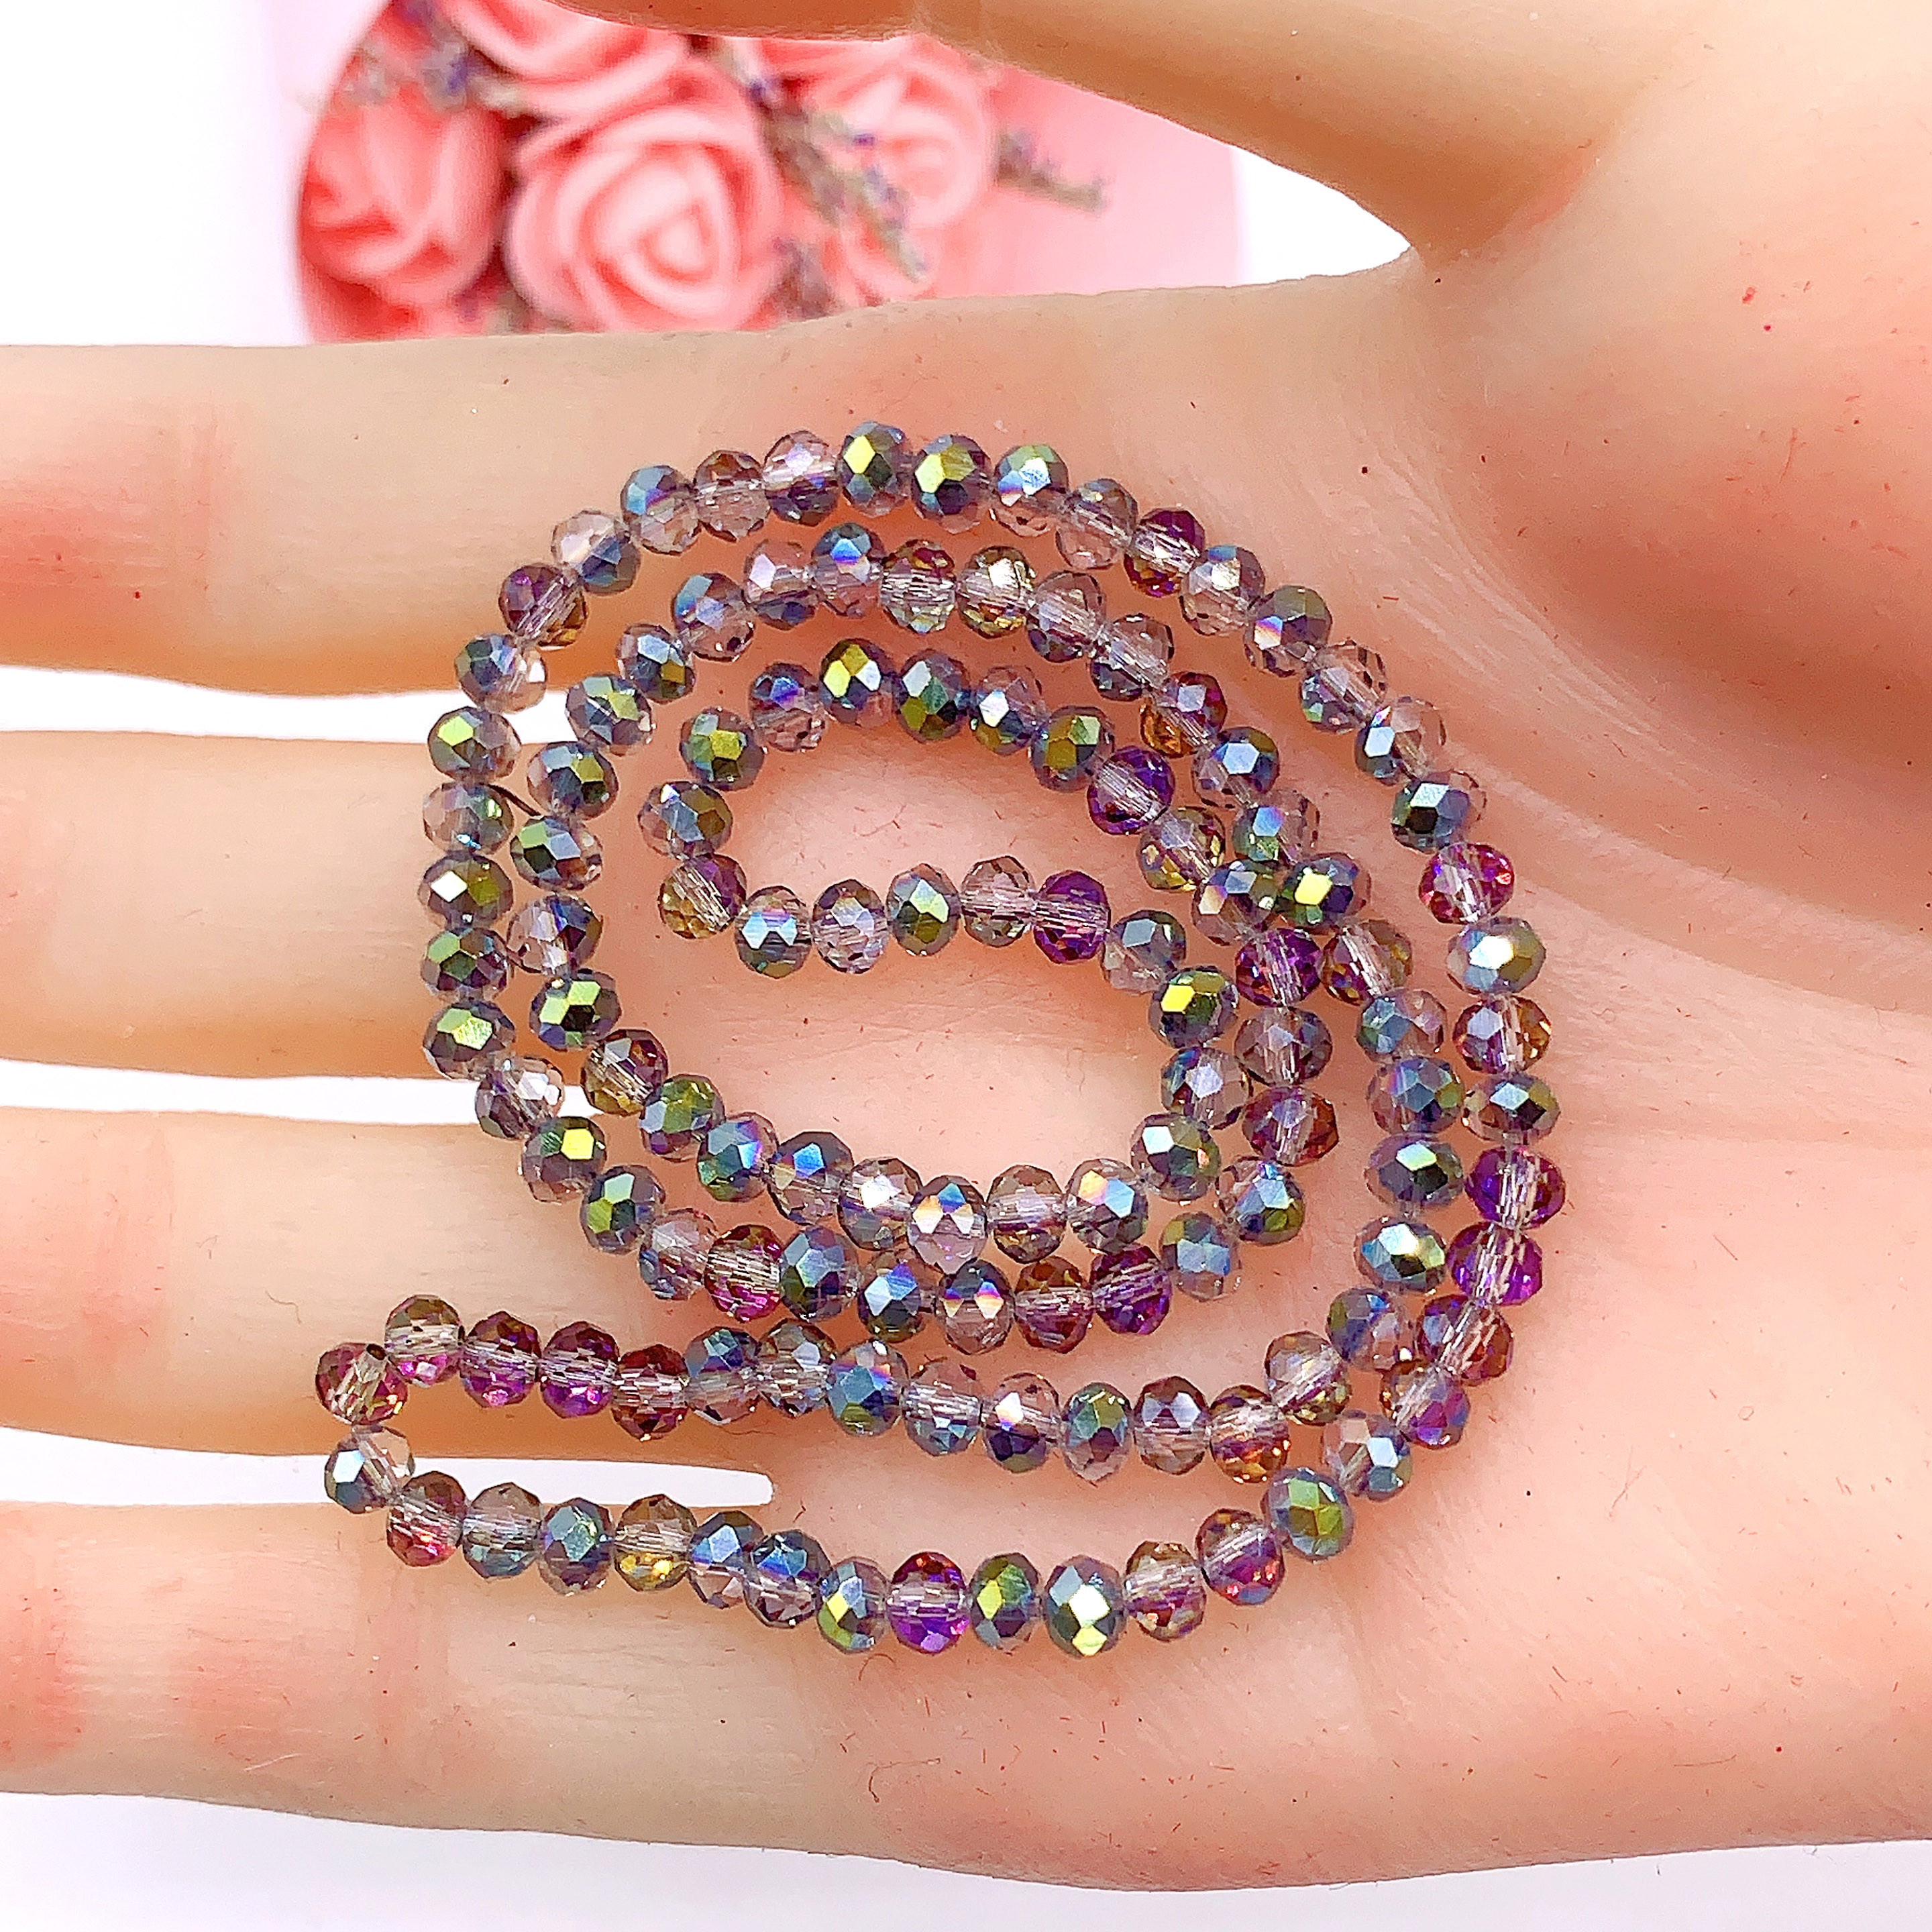 Didiseaon 80pcs Colorful Handmade Beads Earring Beads Colorful Beads for  Bracelets Tulip Jewelry Beads Crystal Spacer Beads Jewelry Making Bead